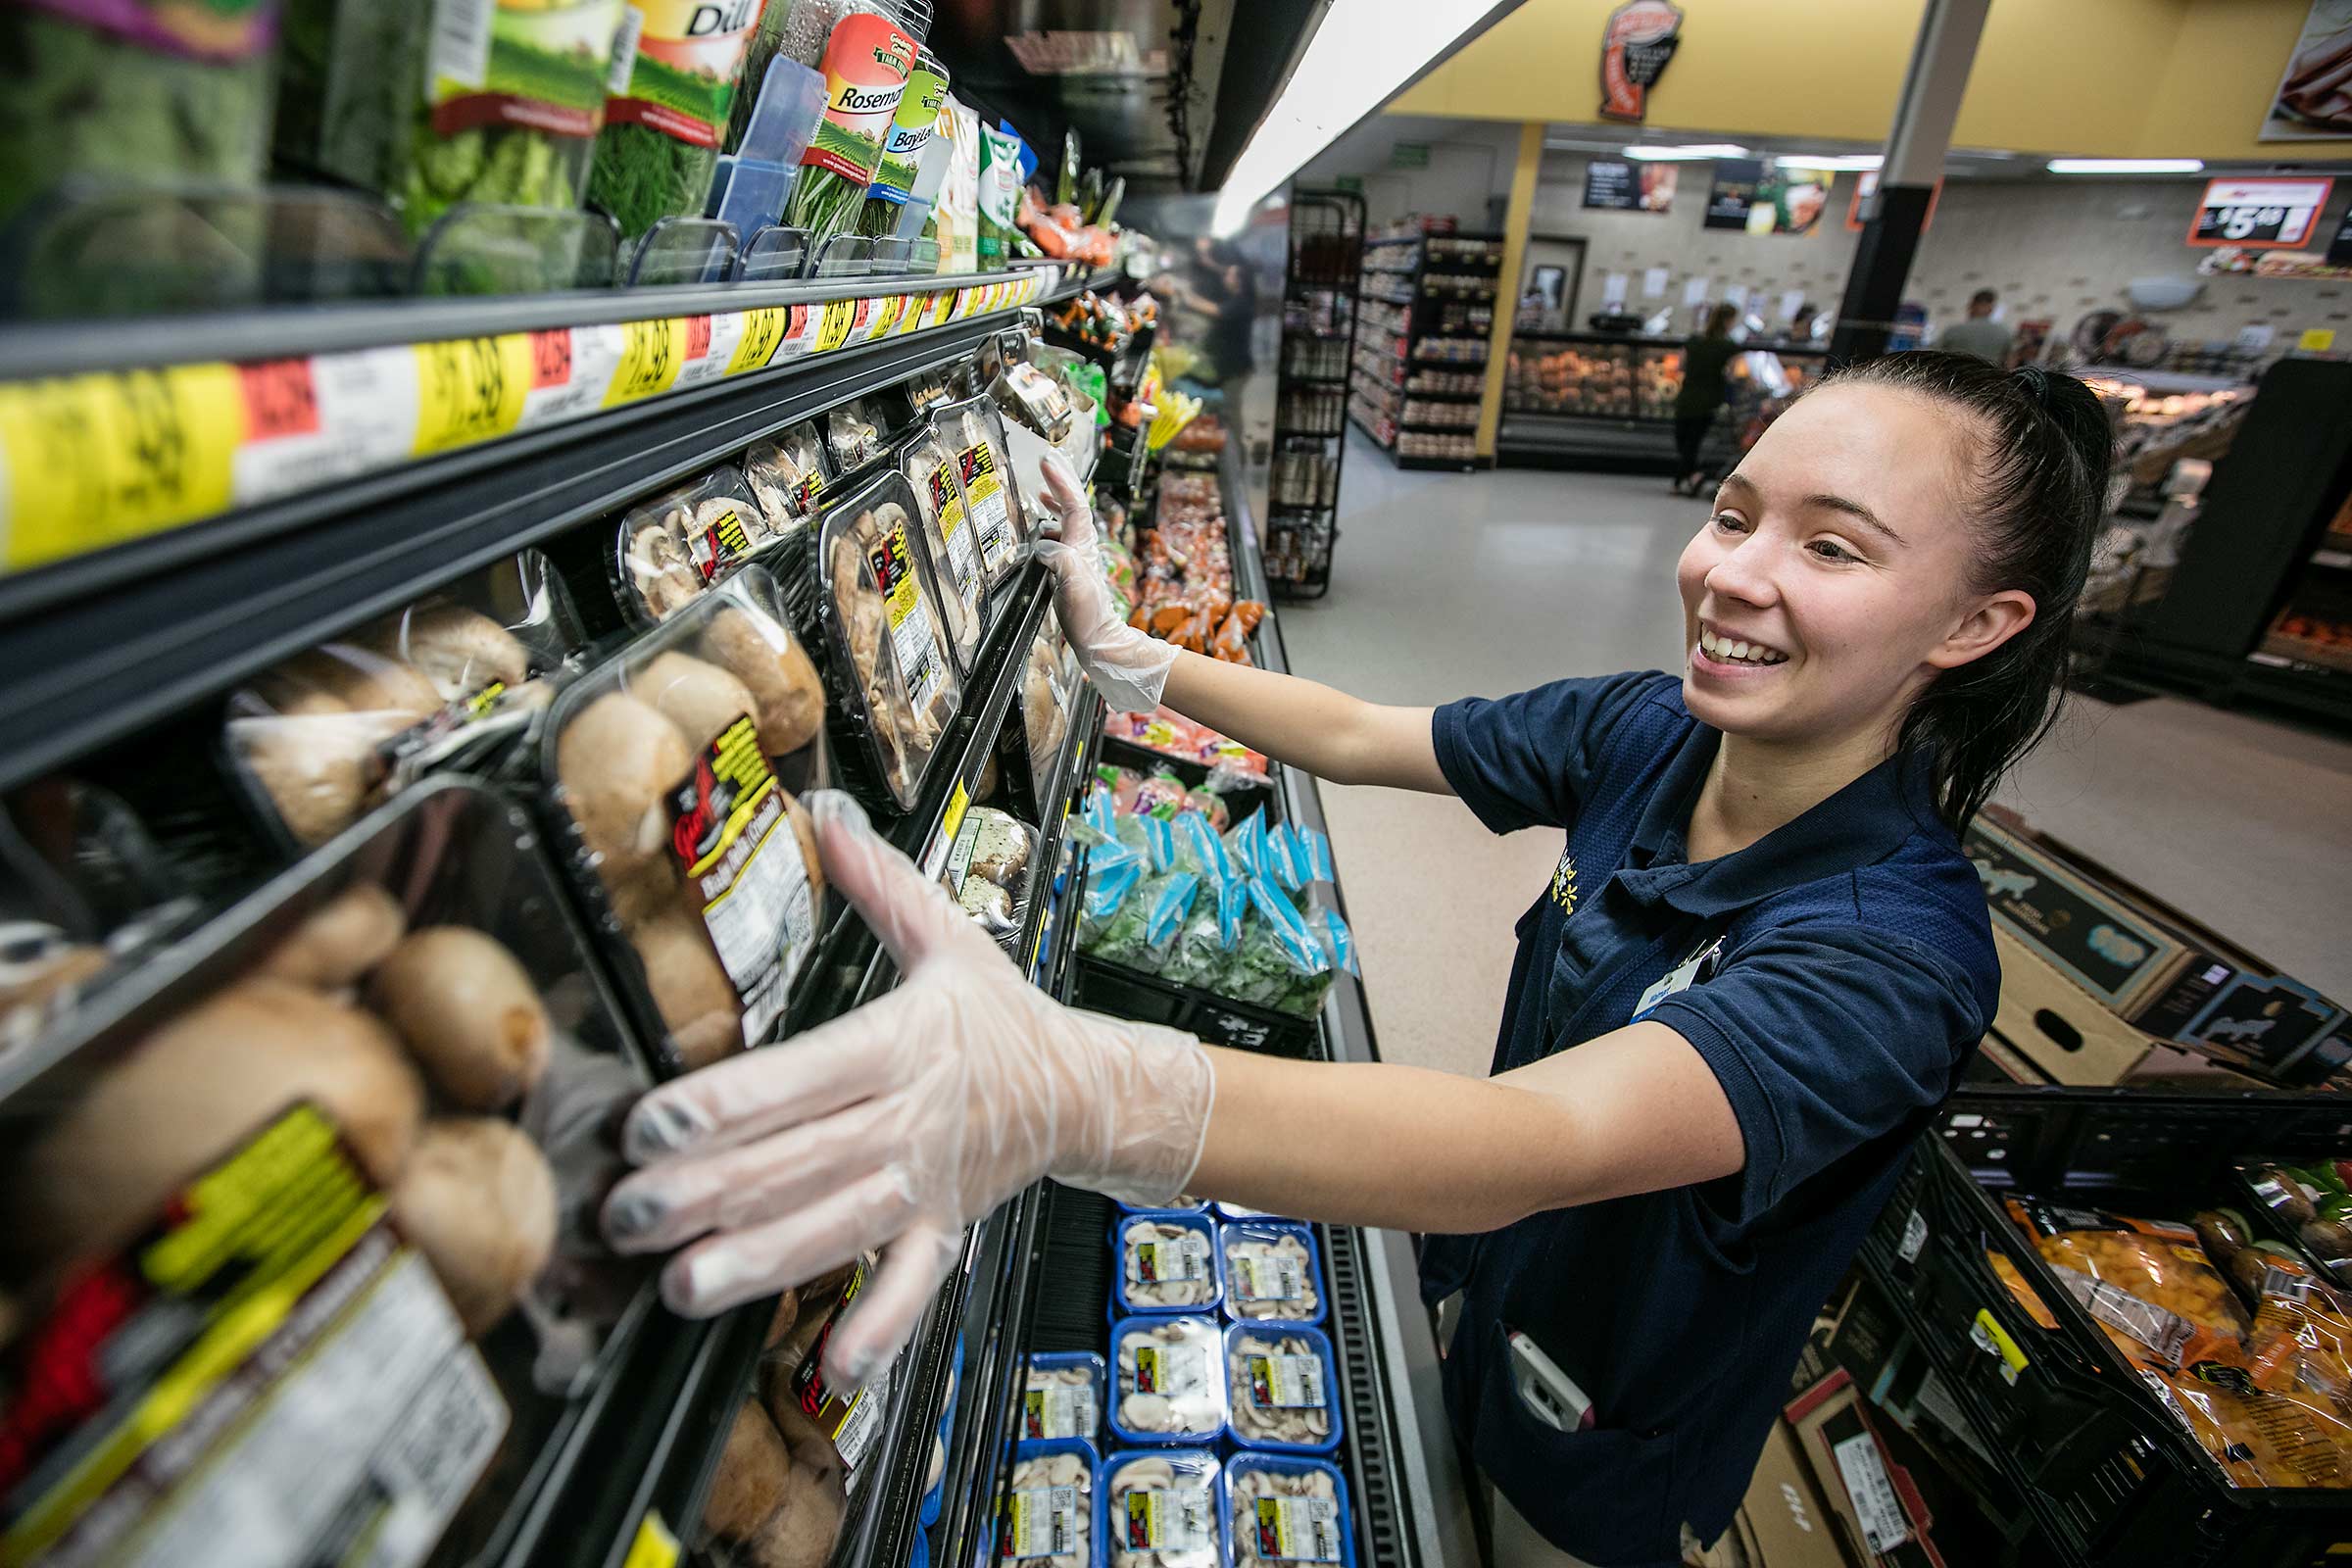 A young female retail store employee smiles while stocking shelves at work